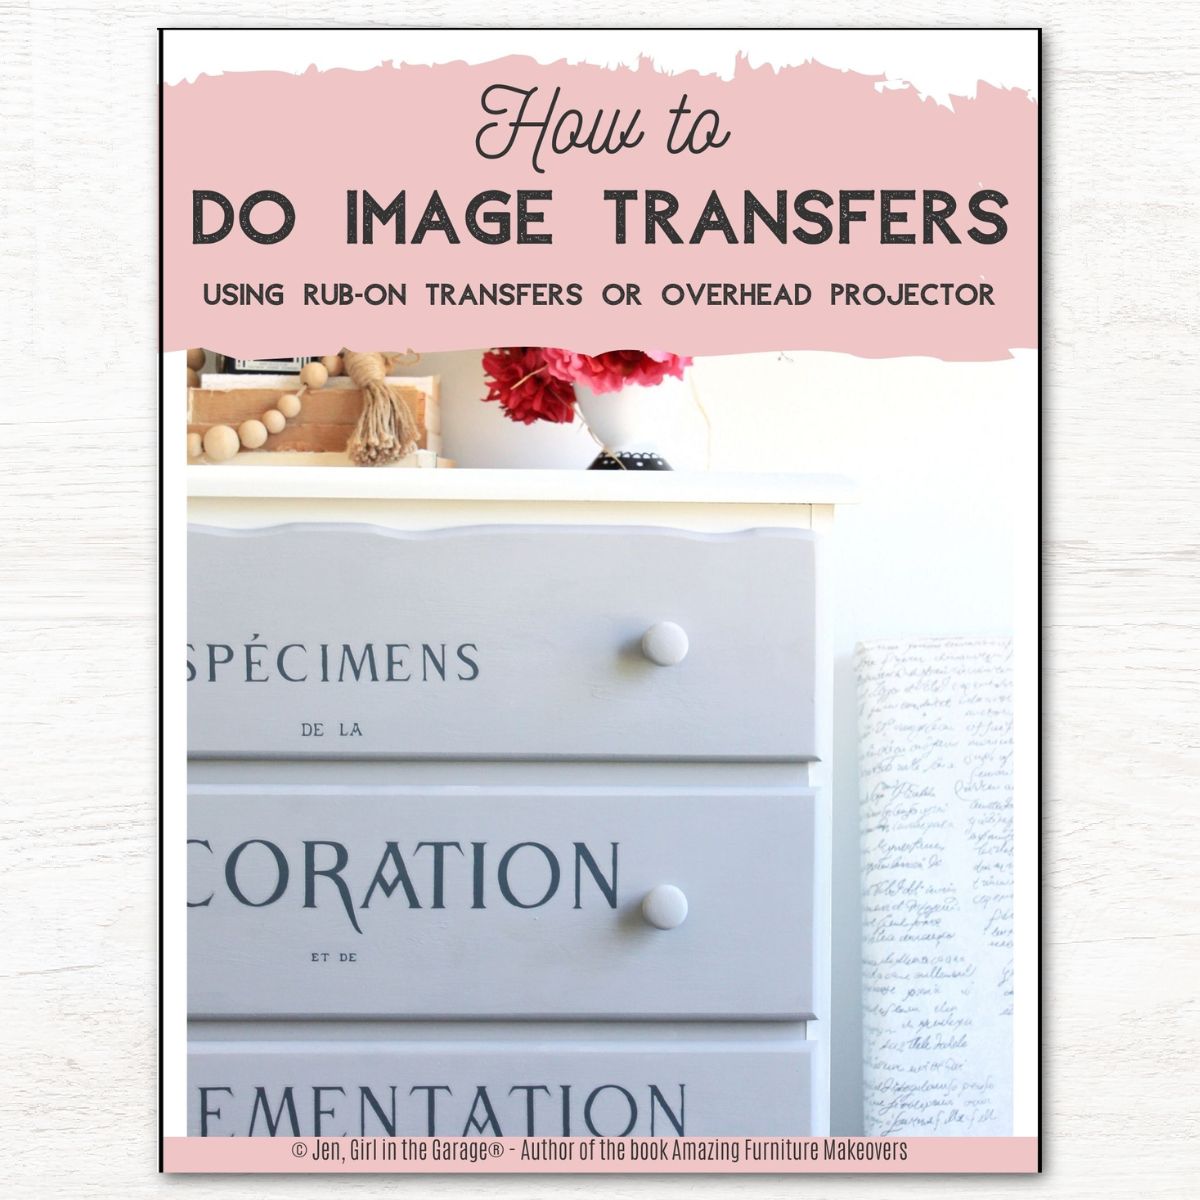 How to do Image Transfers Using Rub-on Transfers or Overhead Projector